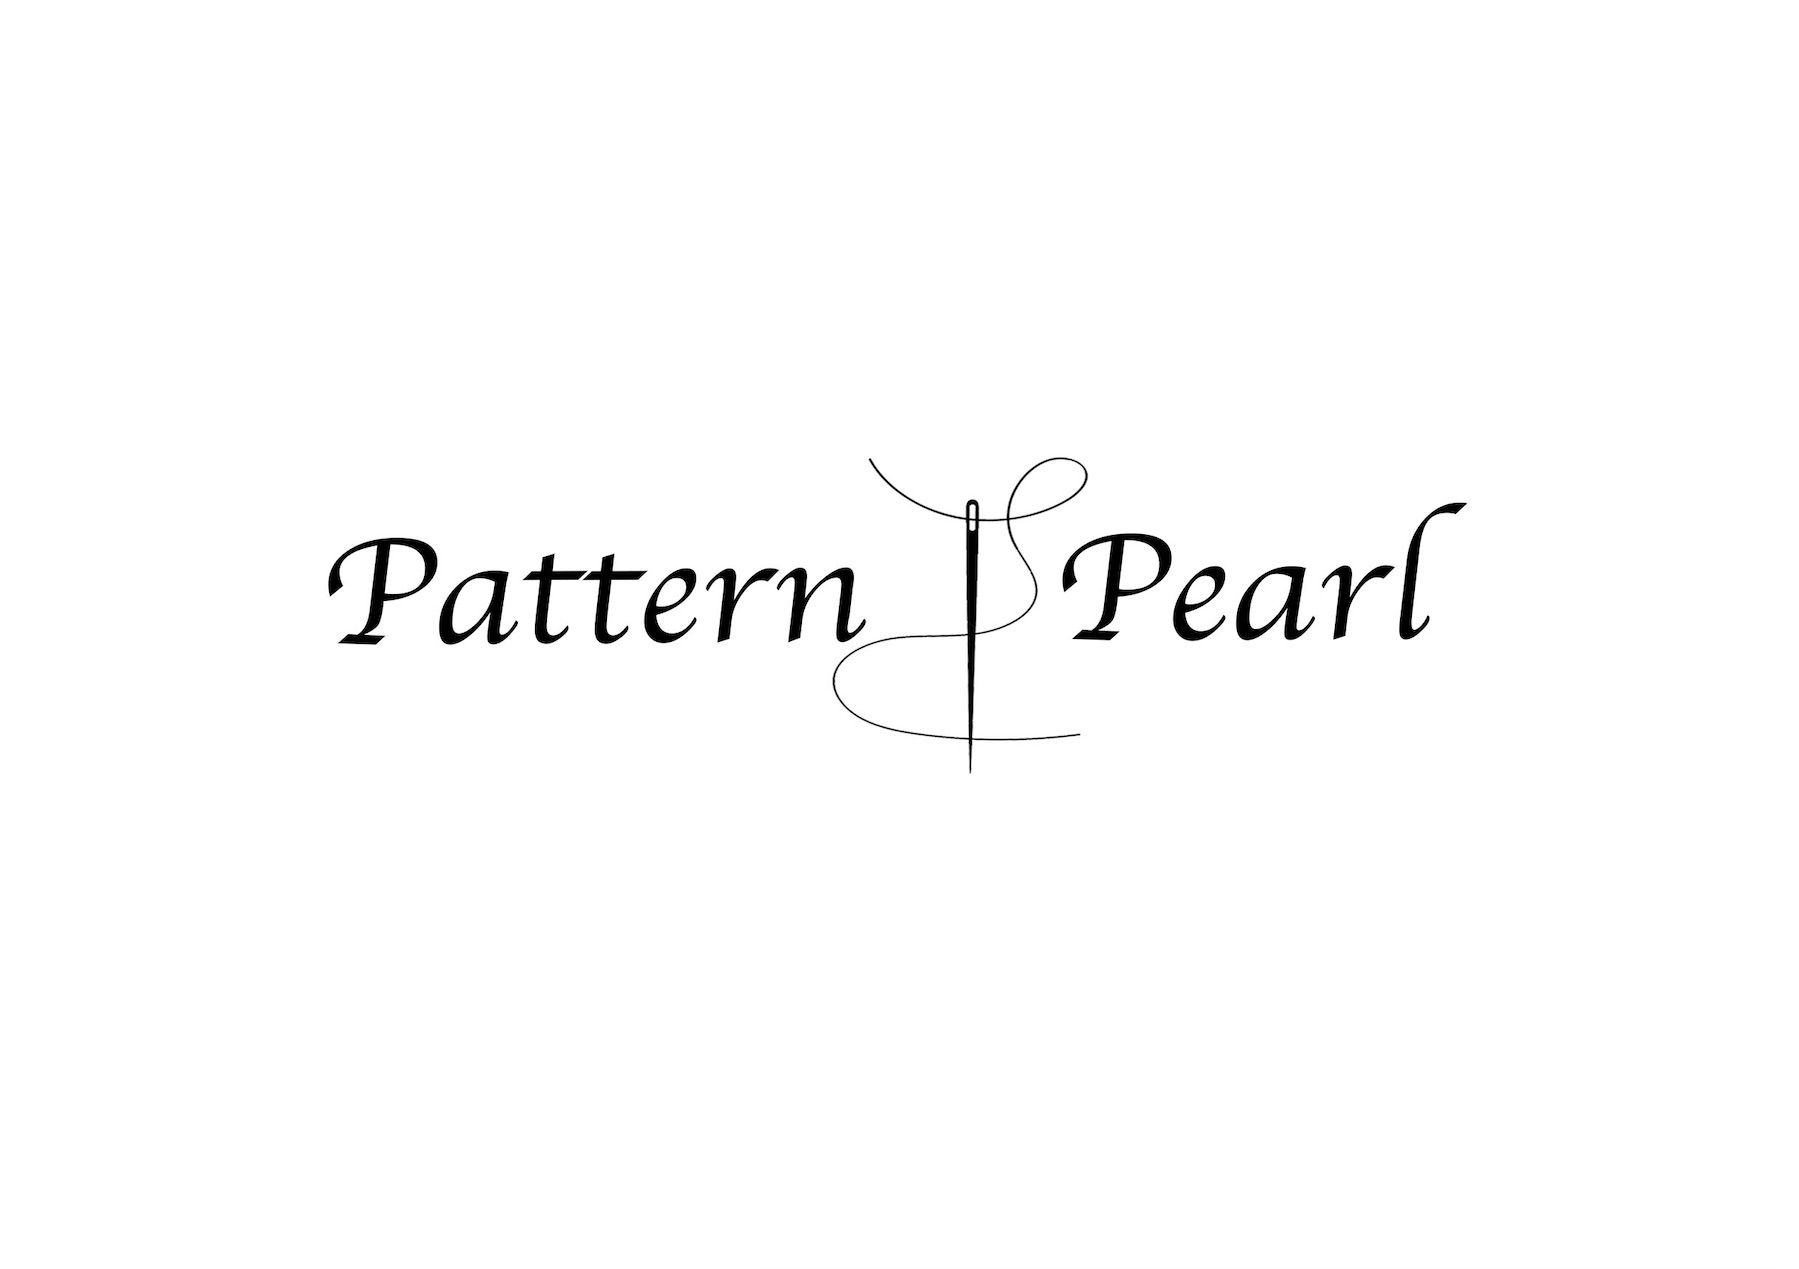 Pattern and Pearl